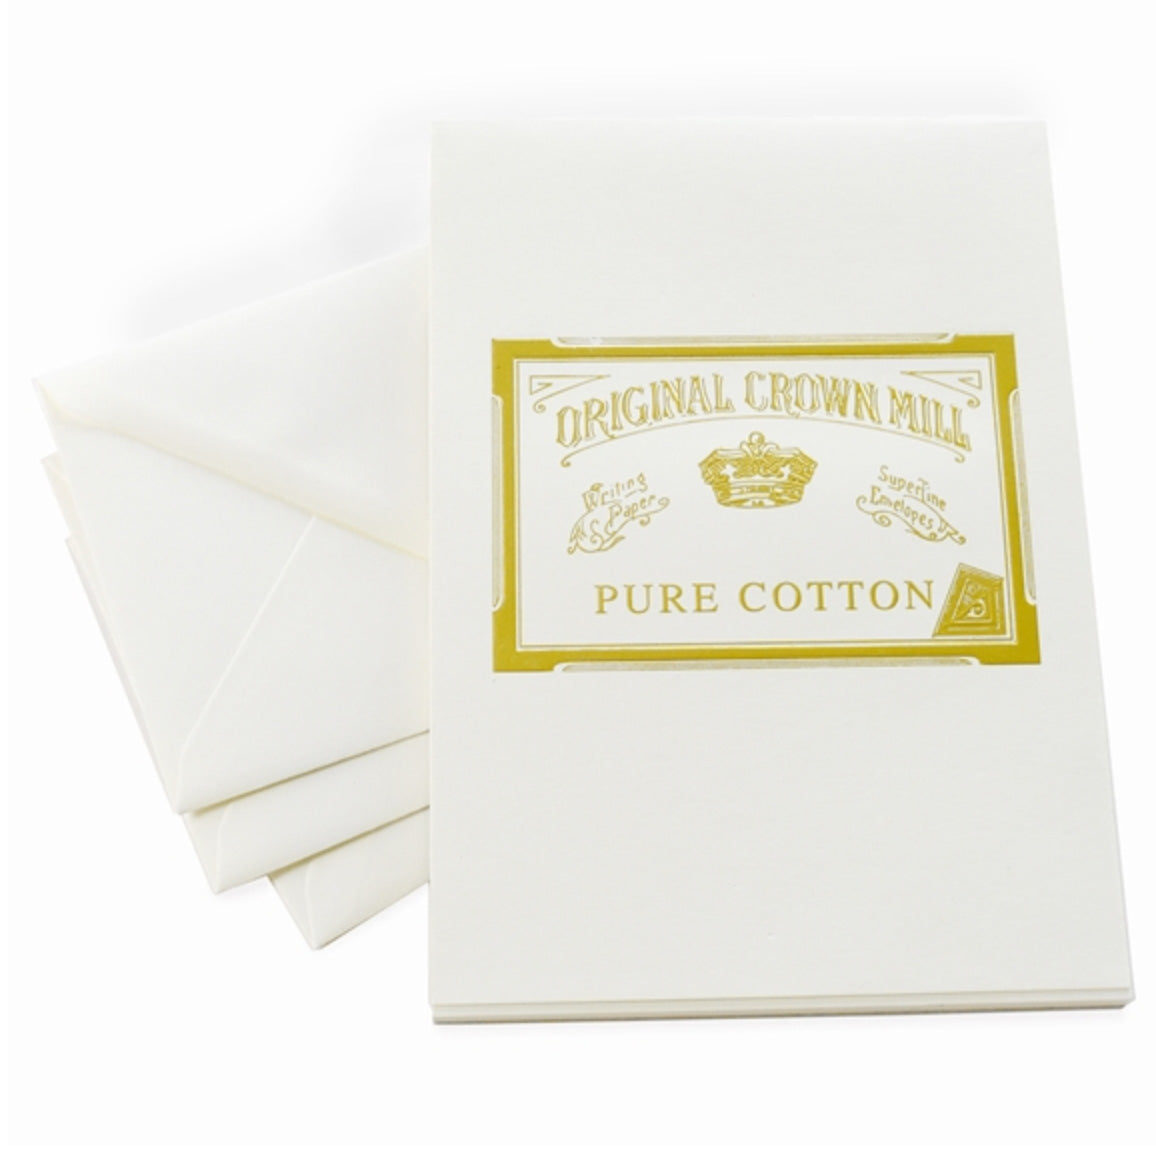 Original Crown Mill Pure Cotton Writing Pads A5 Fountain Pen Friendly With Envelopes